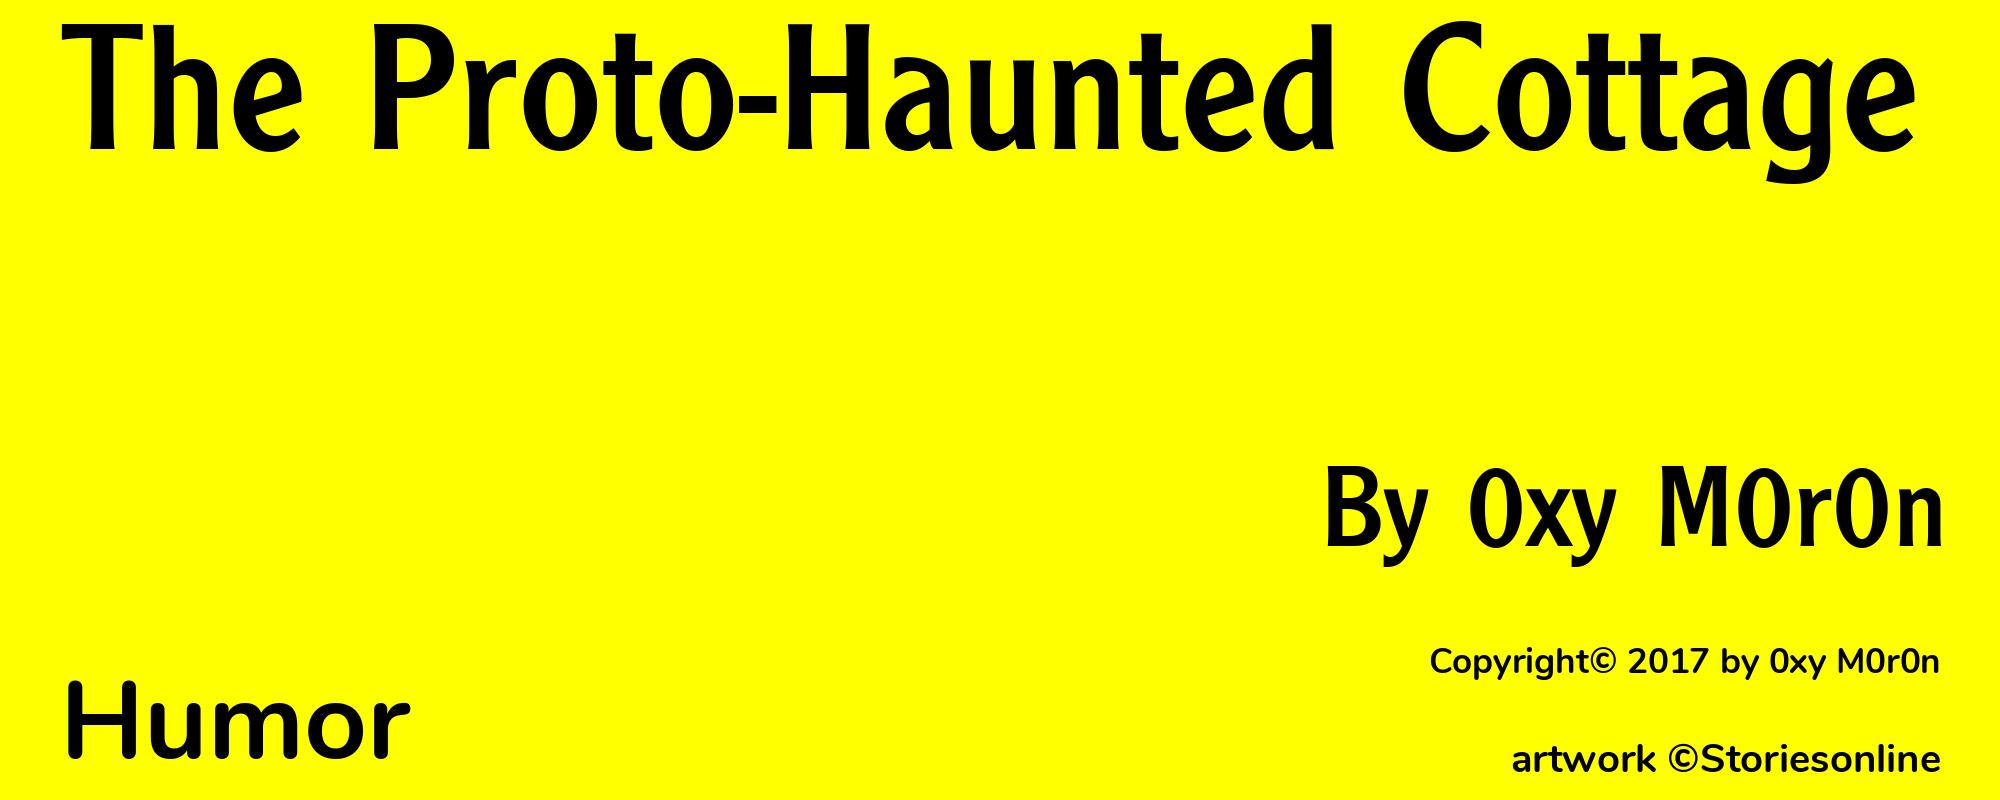 The Proto-Haunted Cottage - Cover